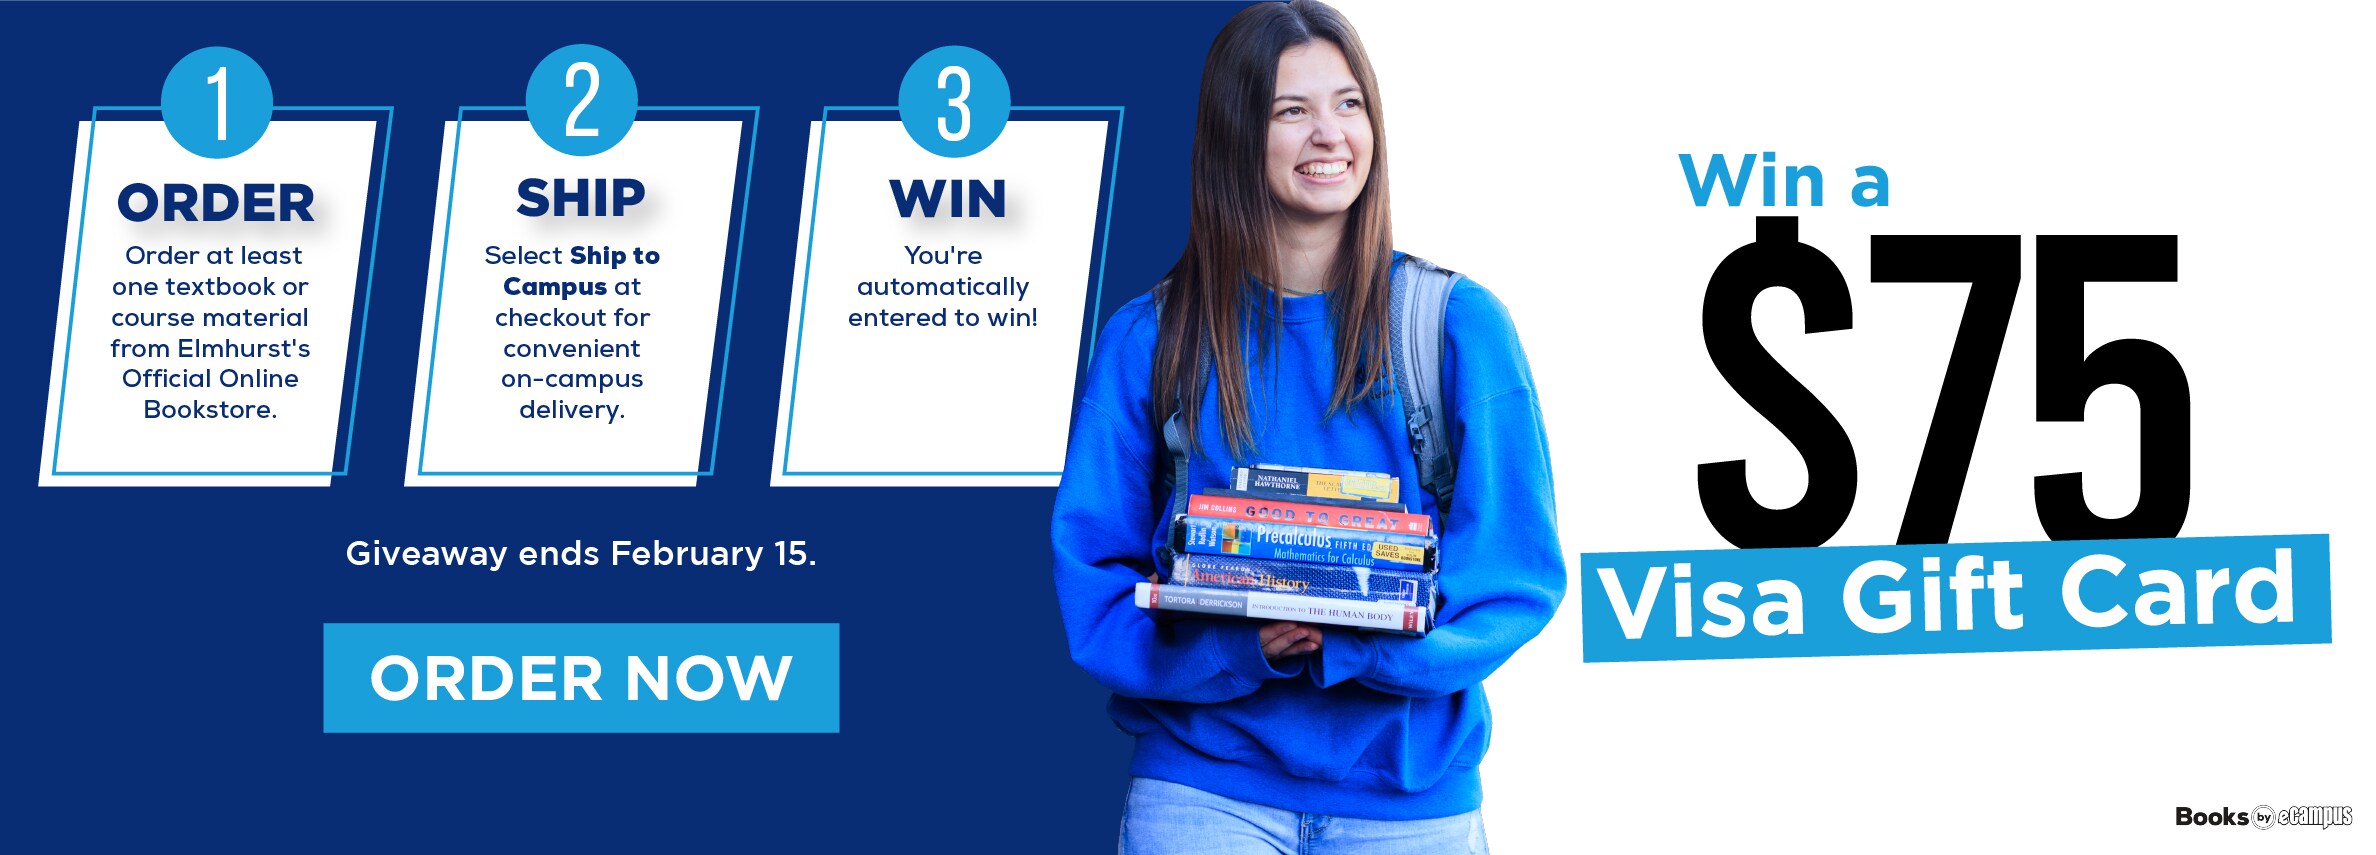 Win a $75 visa gift card ORDER Order at least one textbook or course material from Elmhurst's Official Online Bookstore. SHIP Select Ship to Campus at checkout for convenient on-campus delivery. 3 WIN You're automatically entered to win!